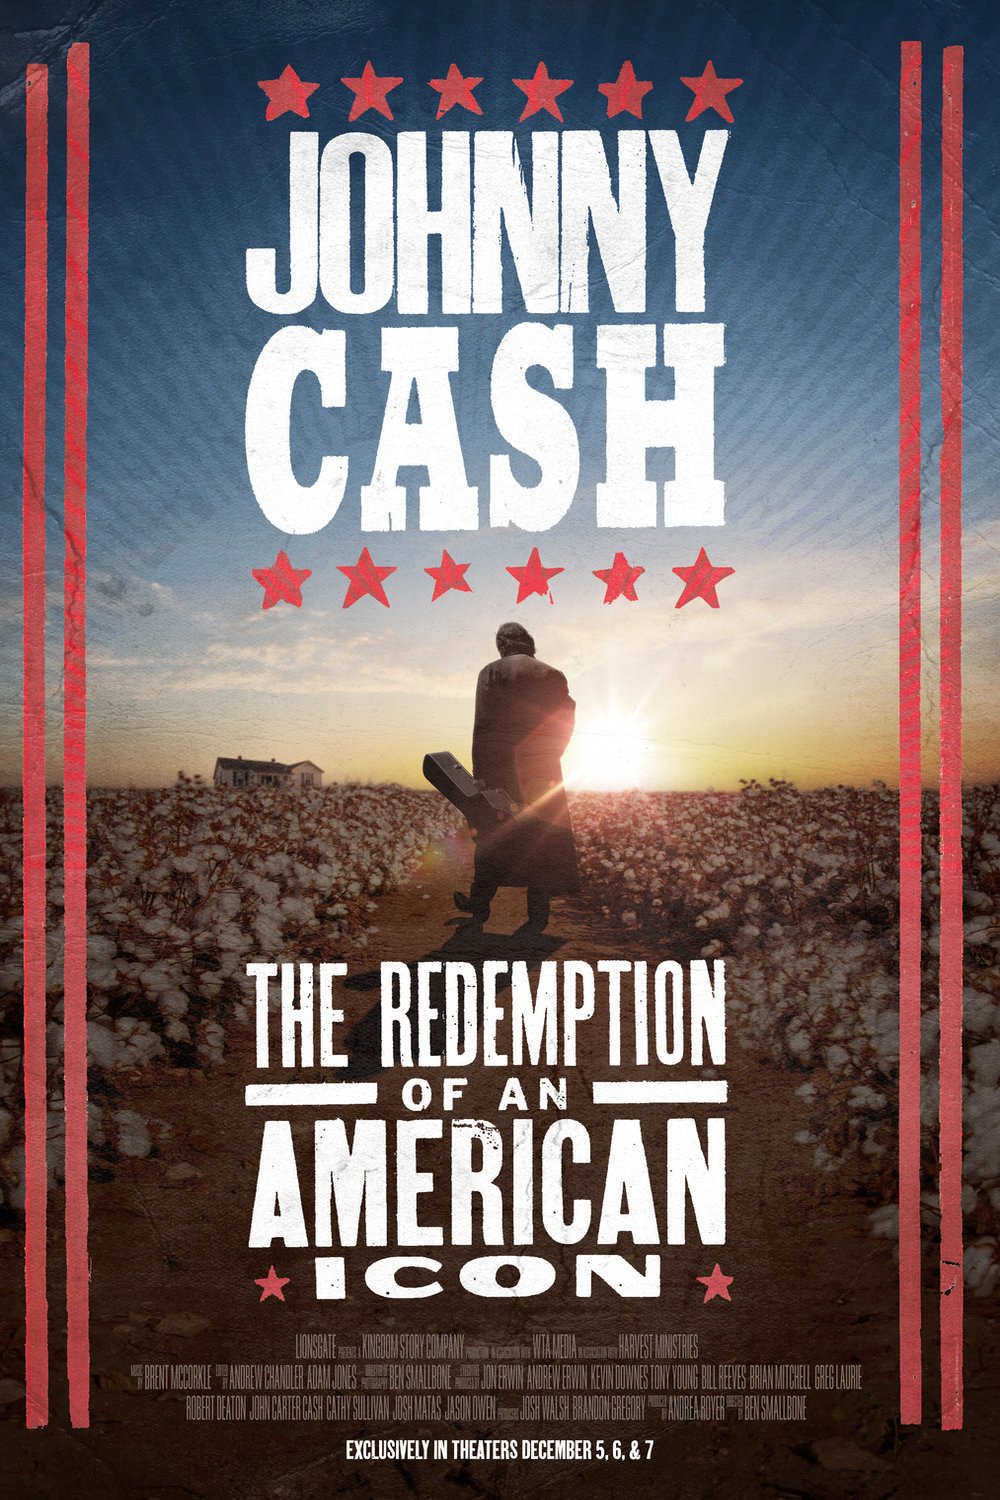 L'affiche du film Johnny Cash: The Redemption of an American Icon